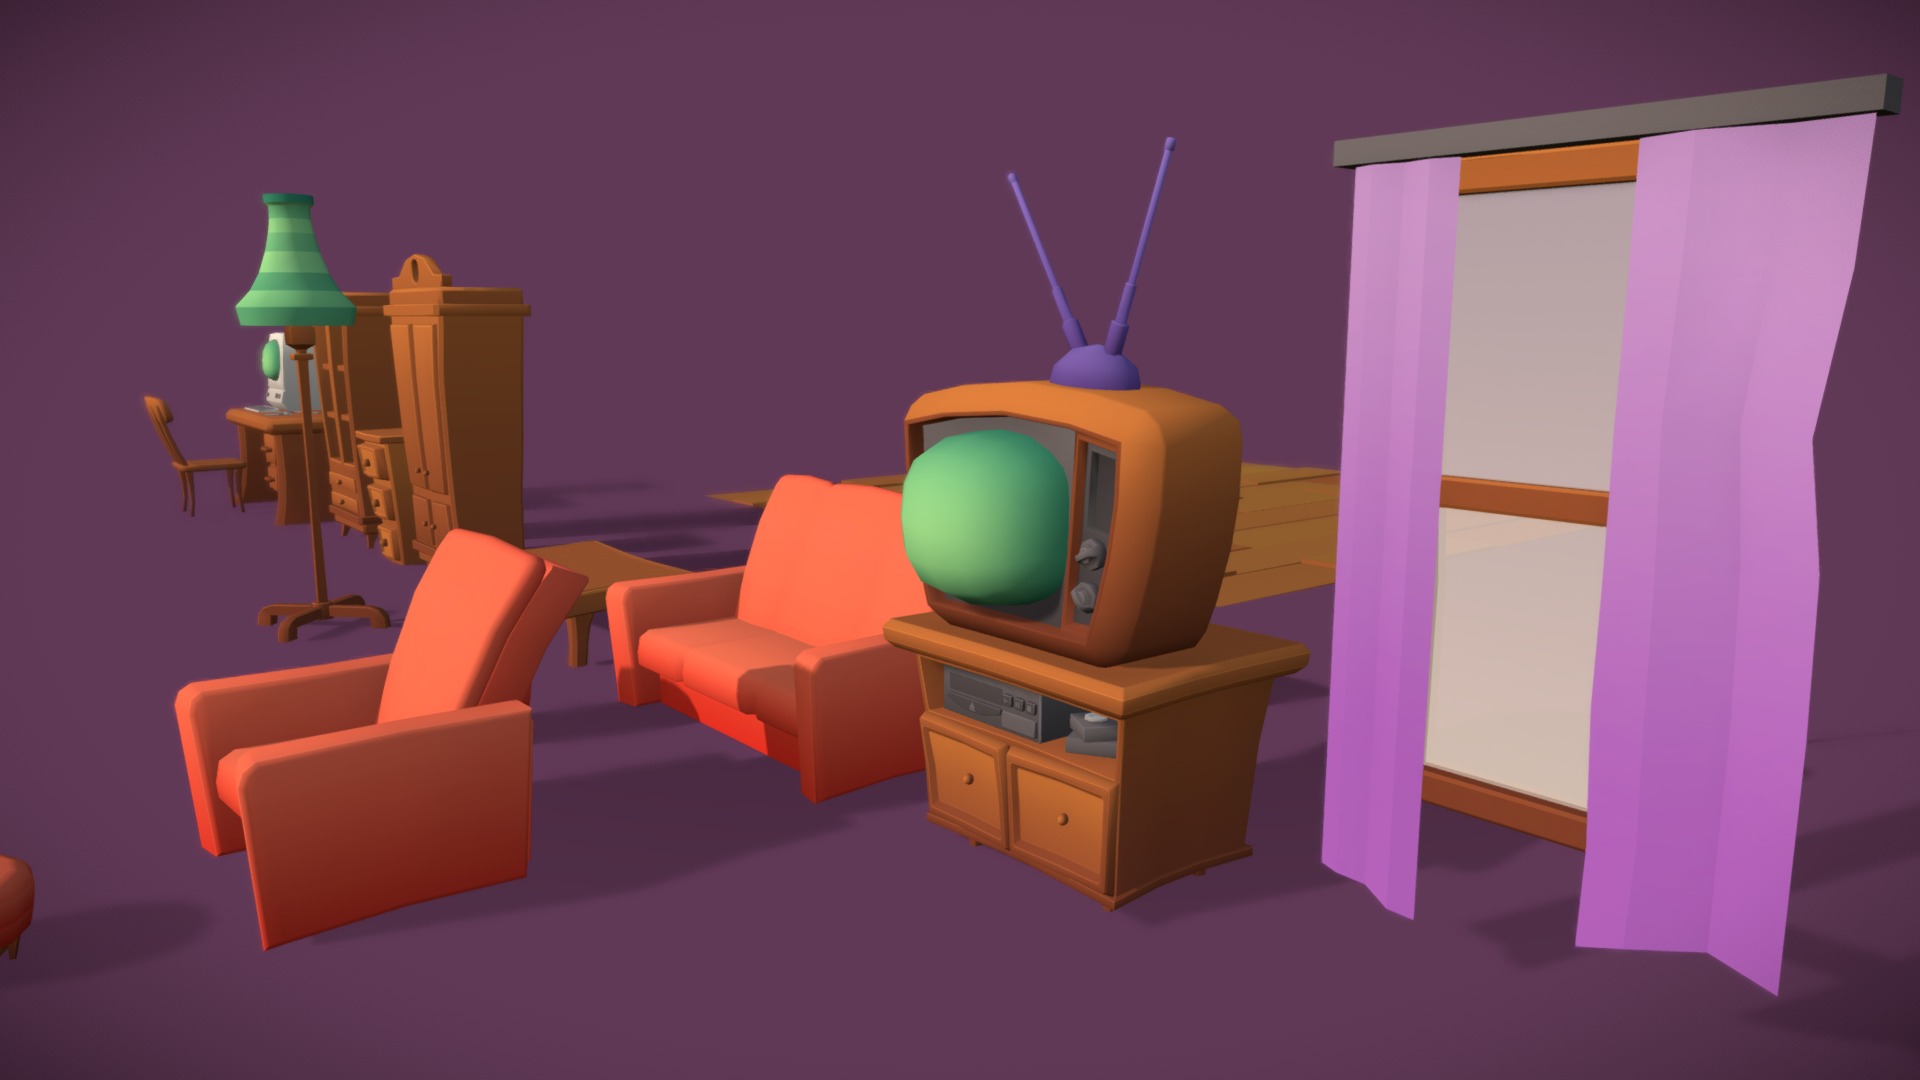 3D model Game ready furniture cartoon style asset - This is a 3D model of the Game ready furniture cartoon style asset. The 3D model is about a room with a couch and chairs.